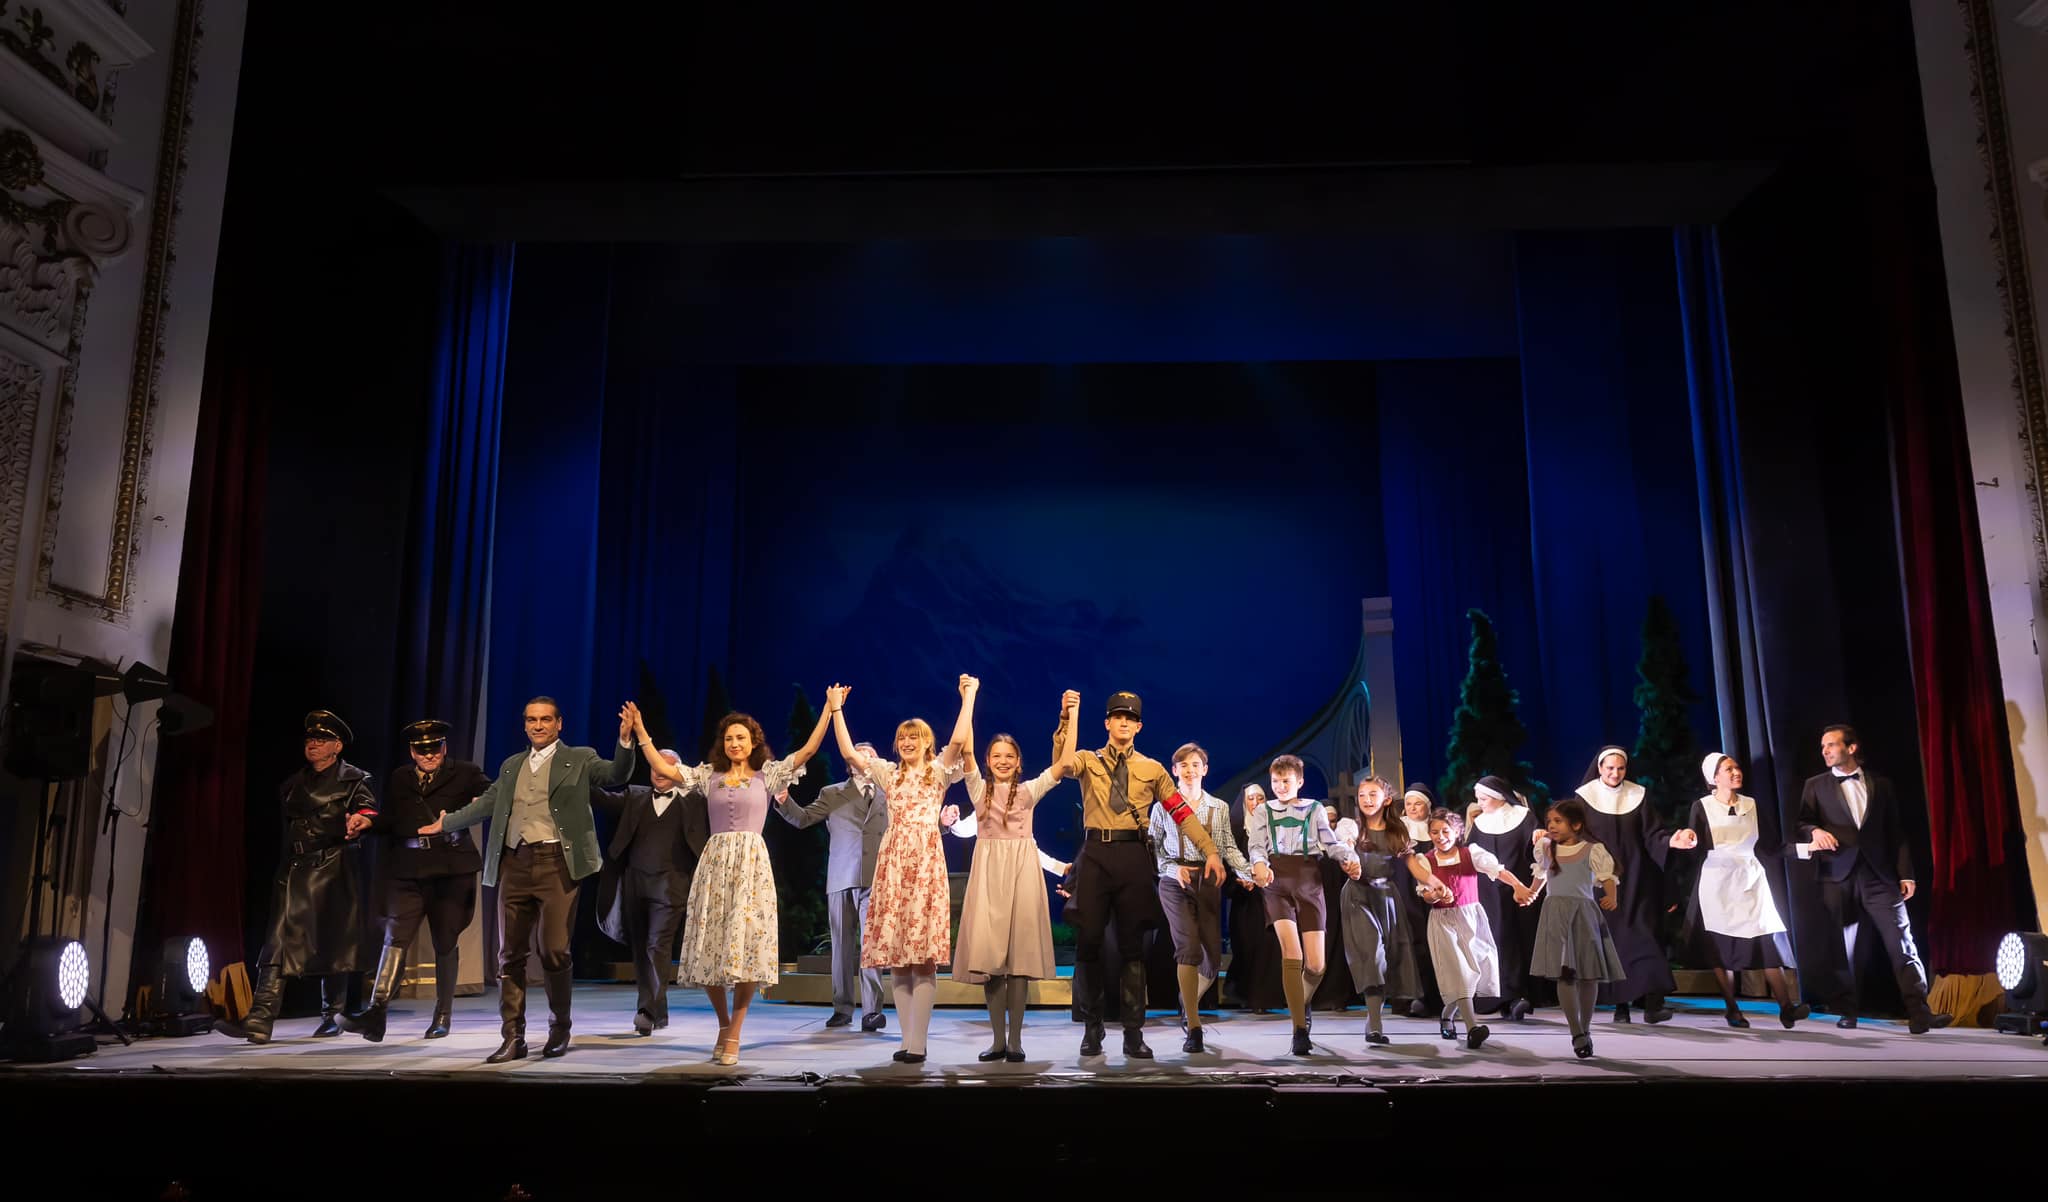 A second evening with the musical “The Sound of Music” by Richard Rodgers, text by Oscar Hammerstein II